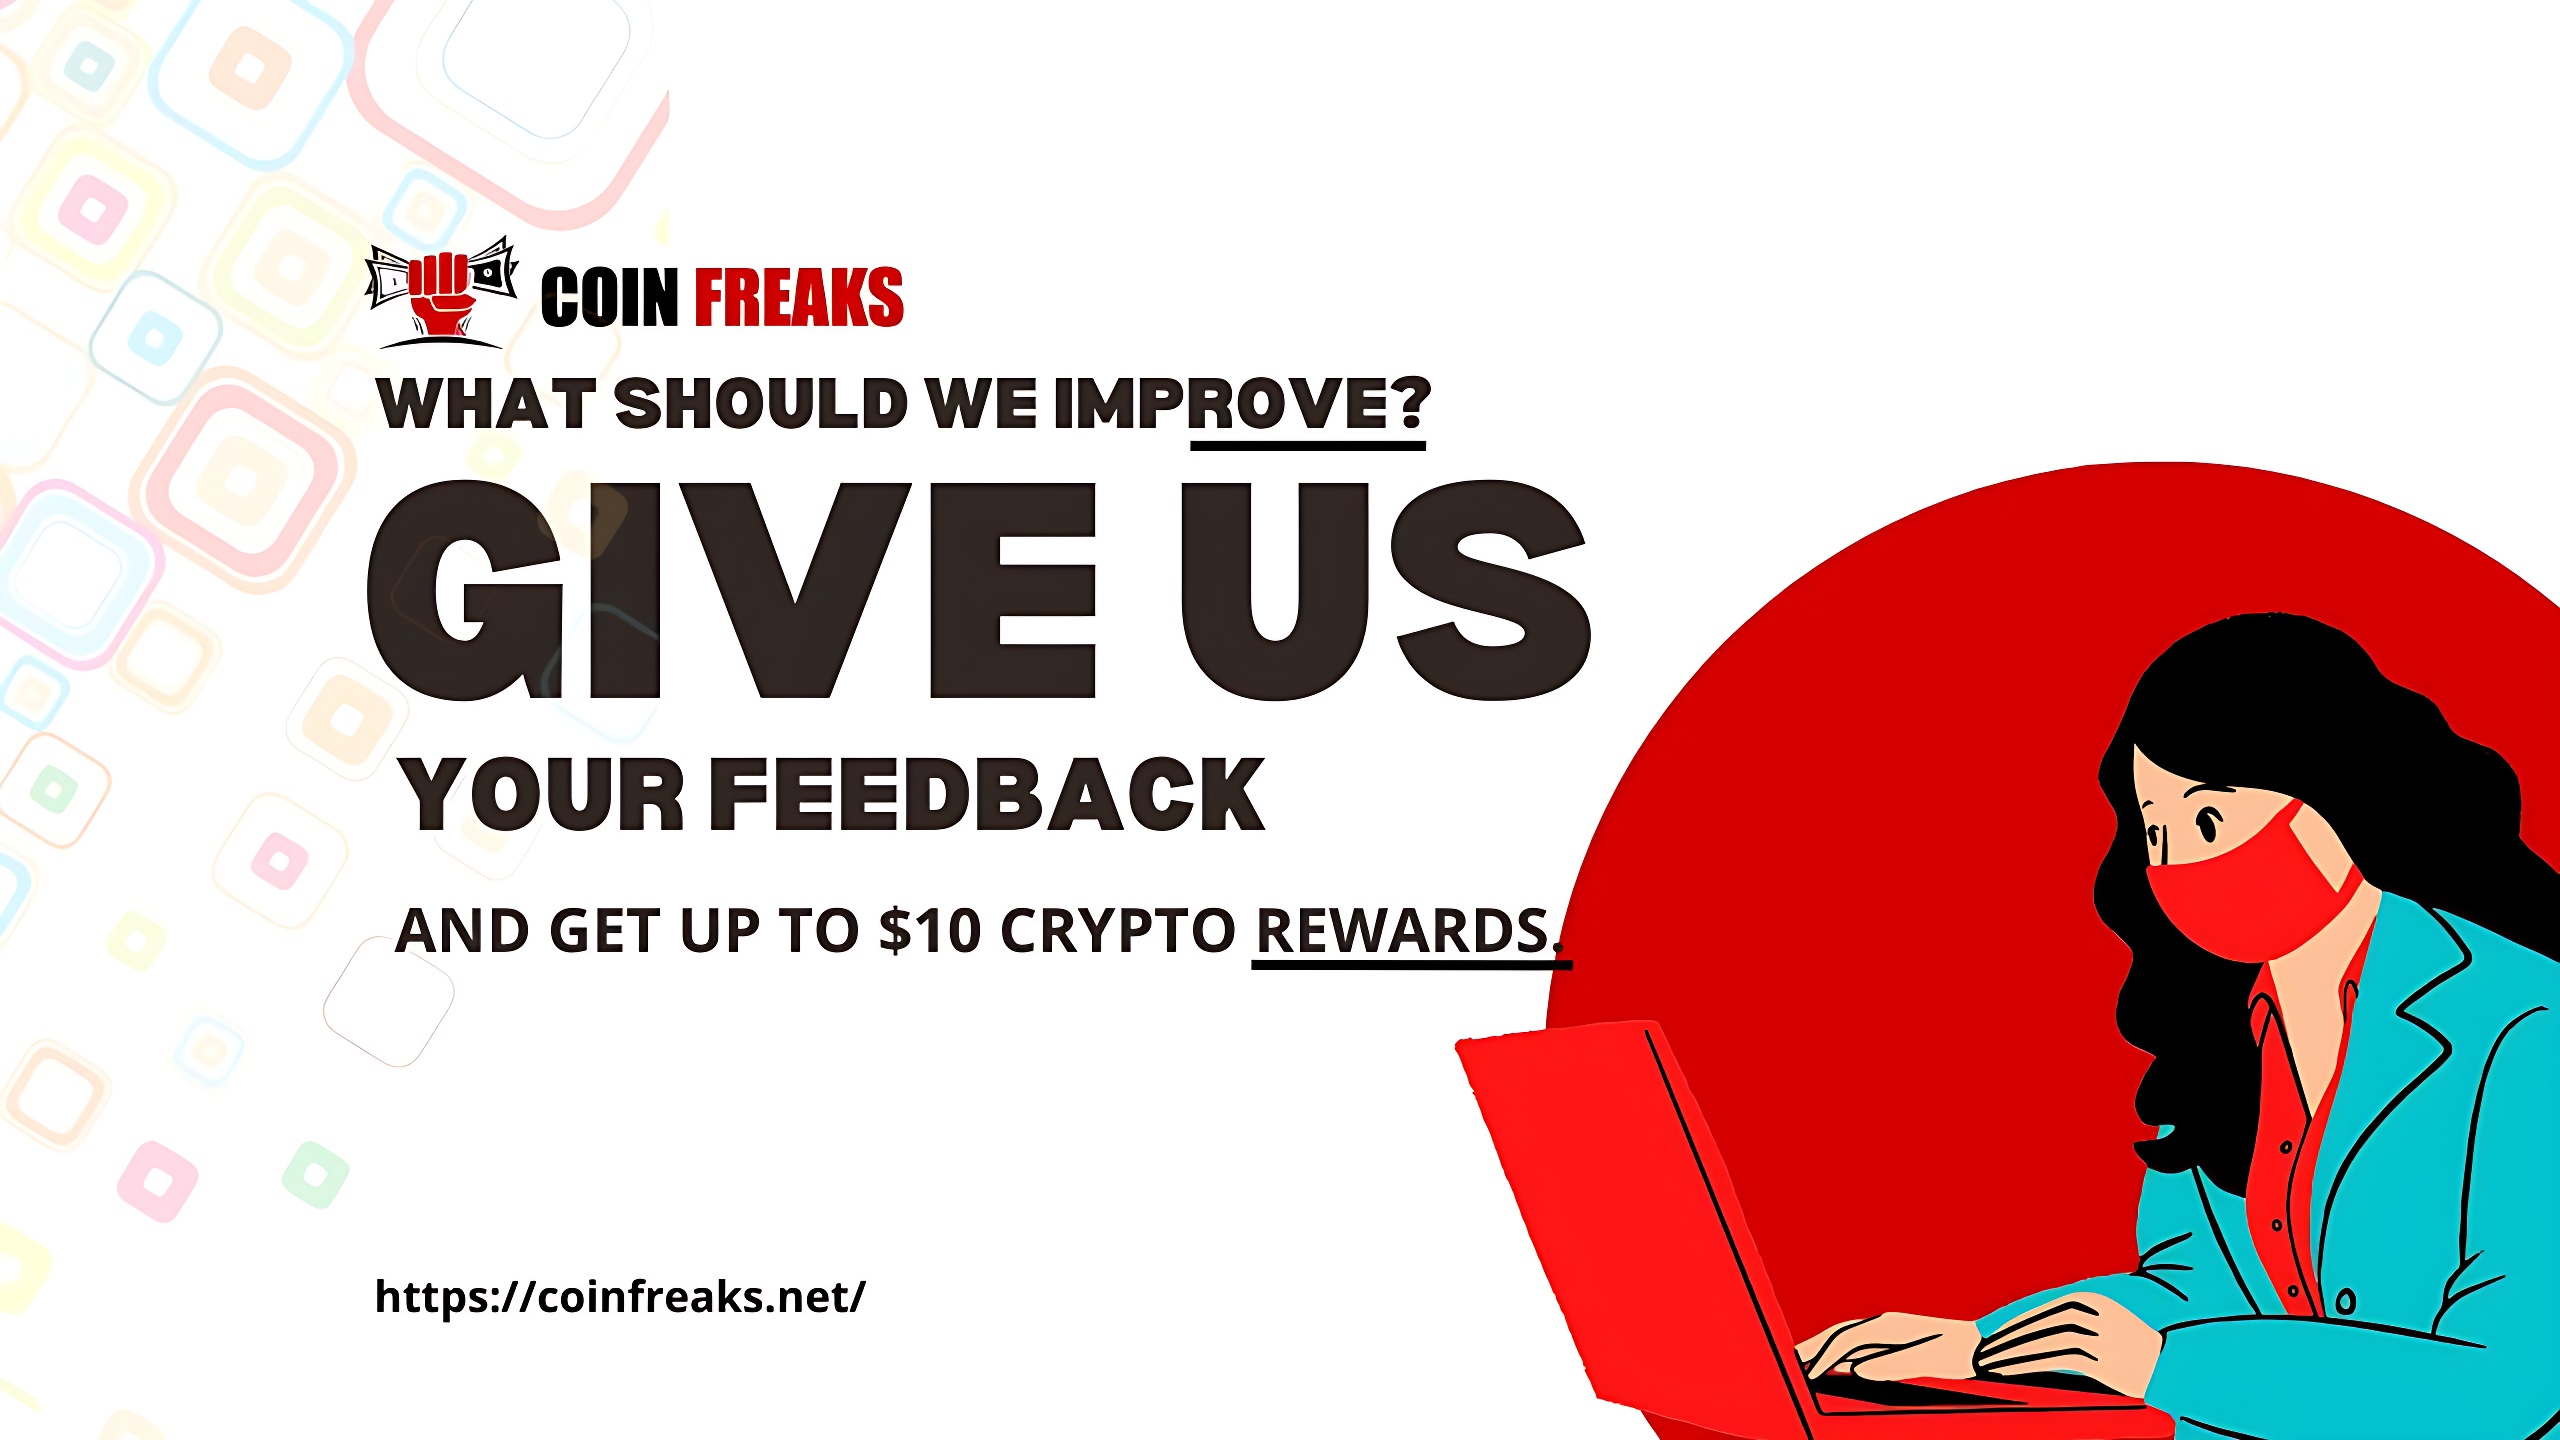 Give us your honest feedback and get a crypto reward!